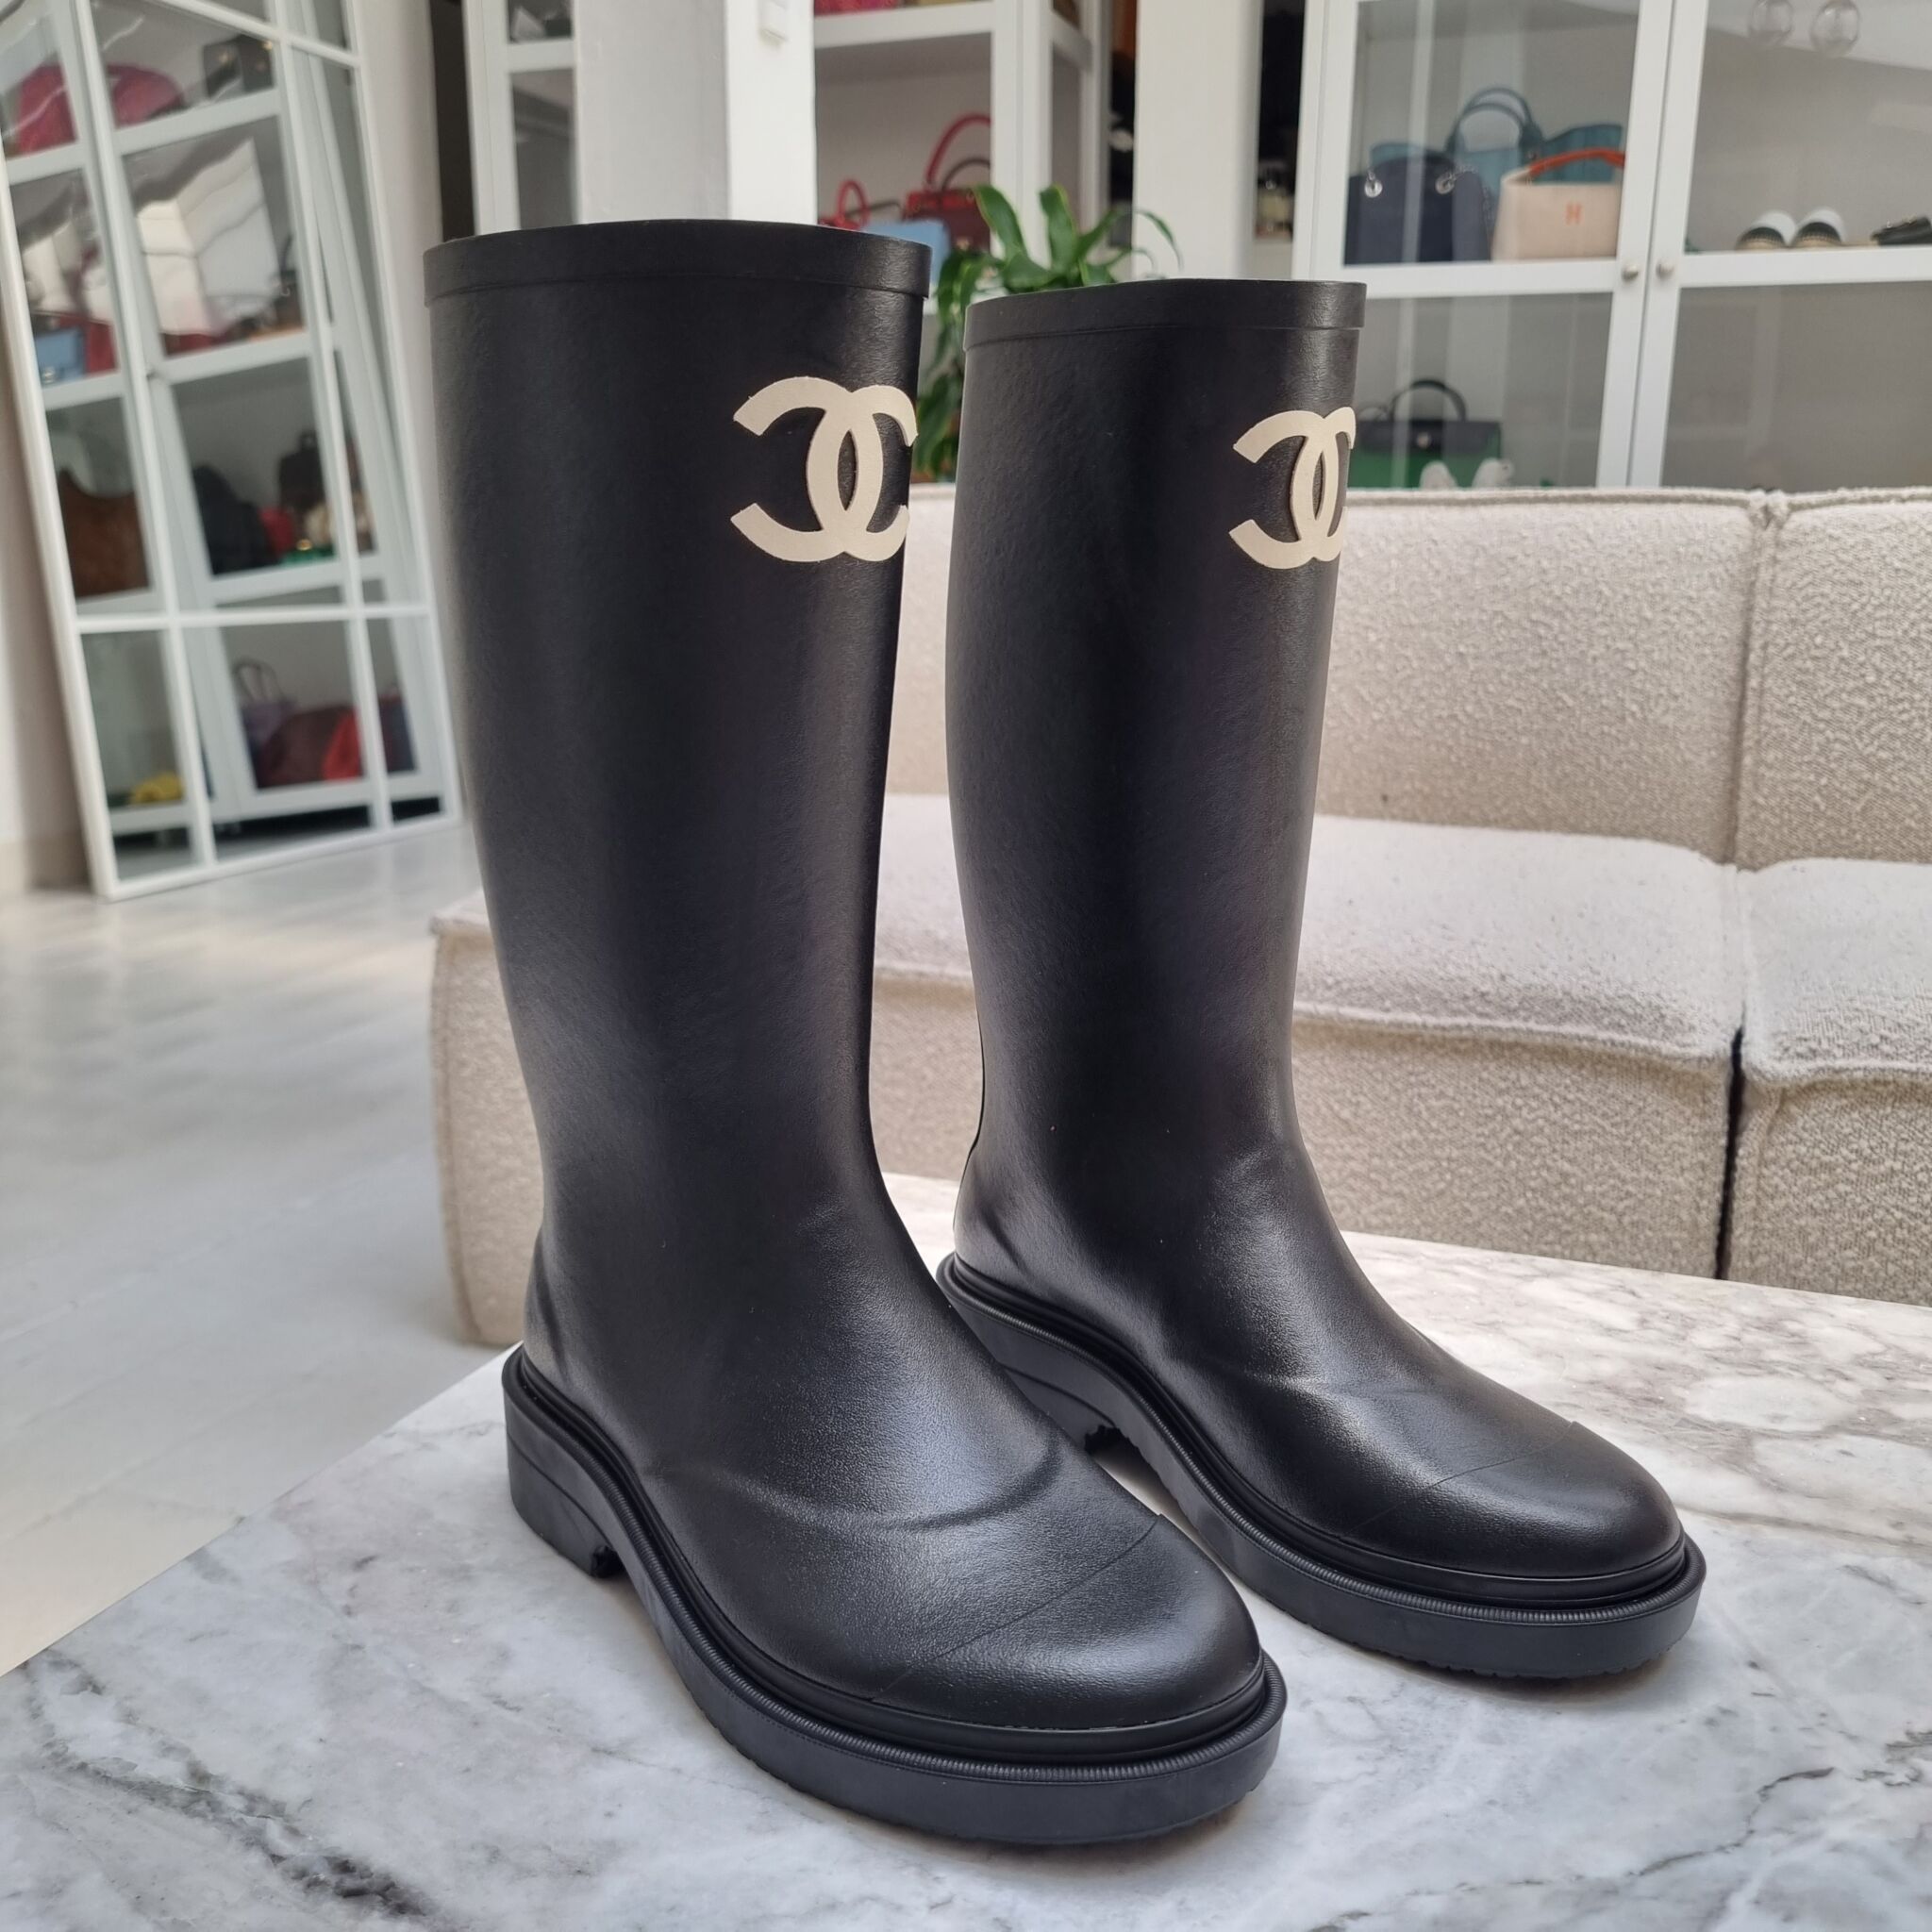 Chanel Fall 2022 ReadytoWear Collection  Chanel boots Chanel shoes  Fashion